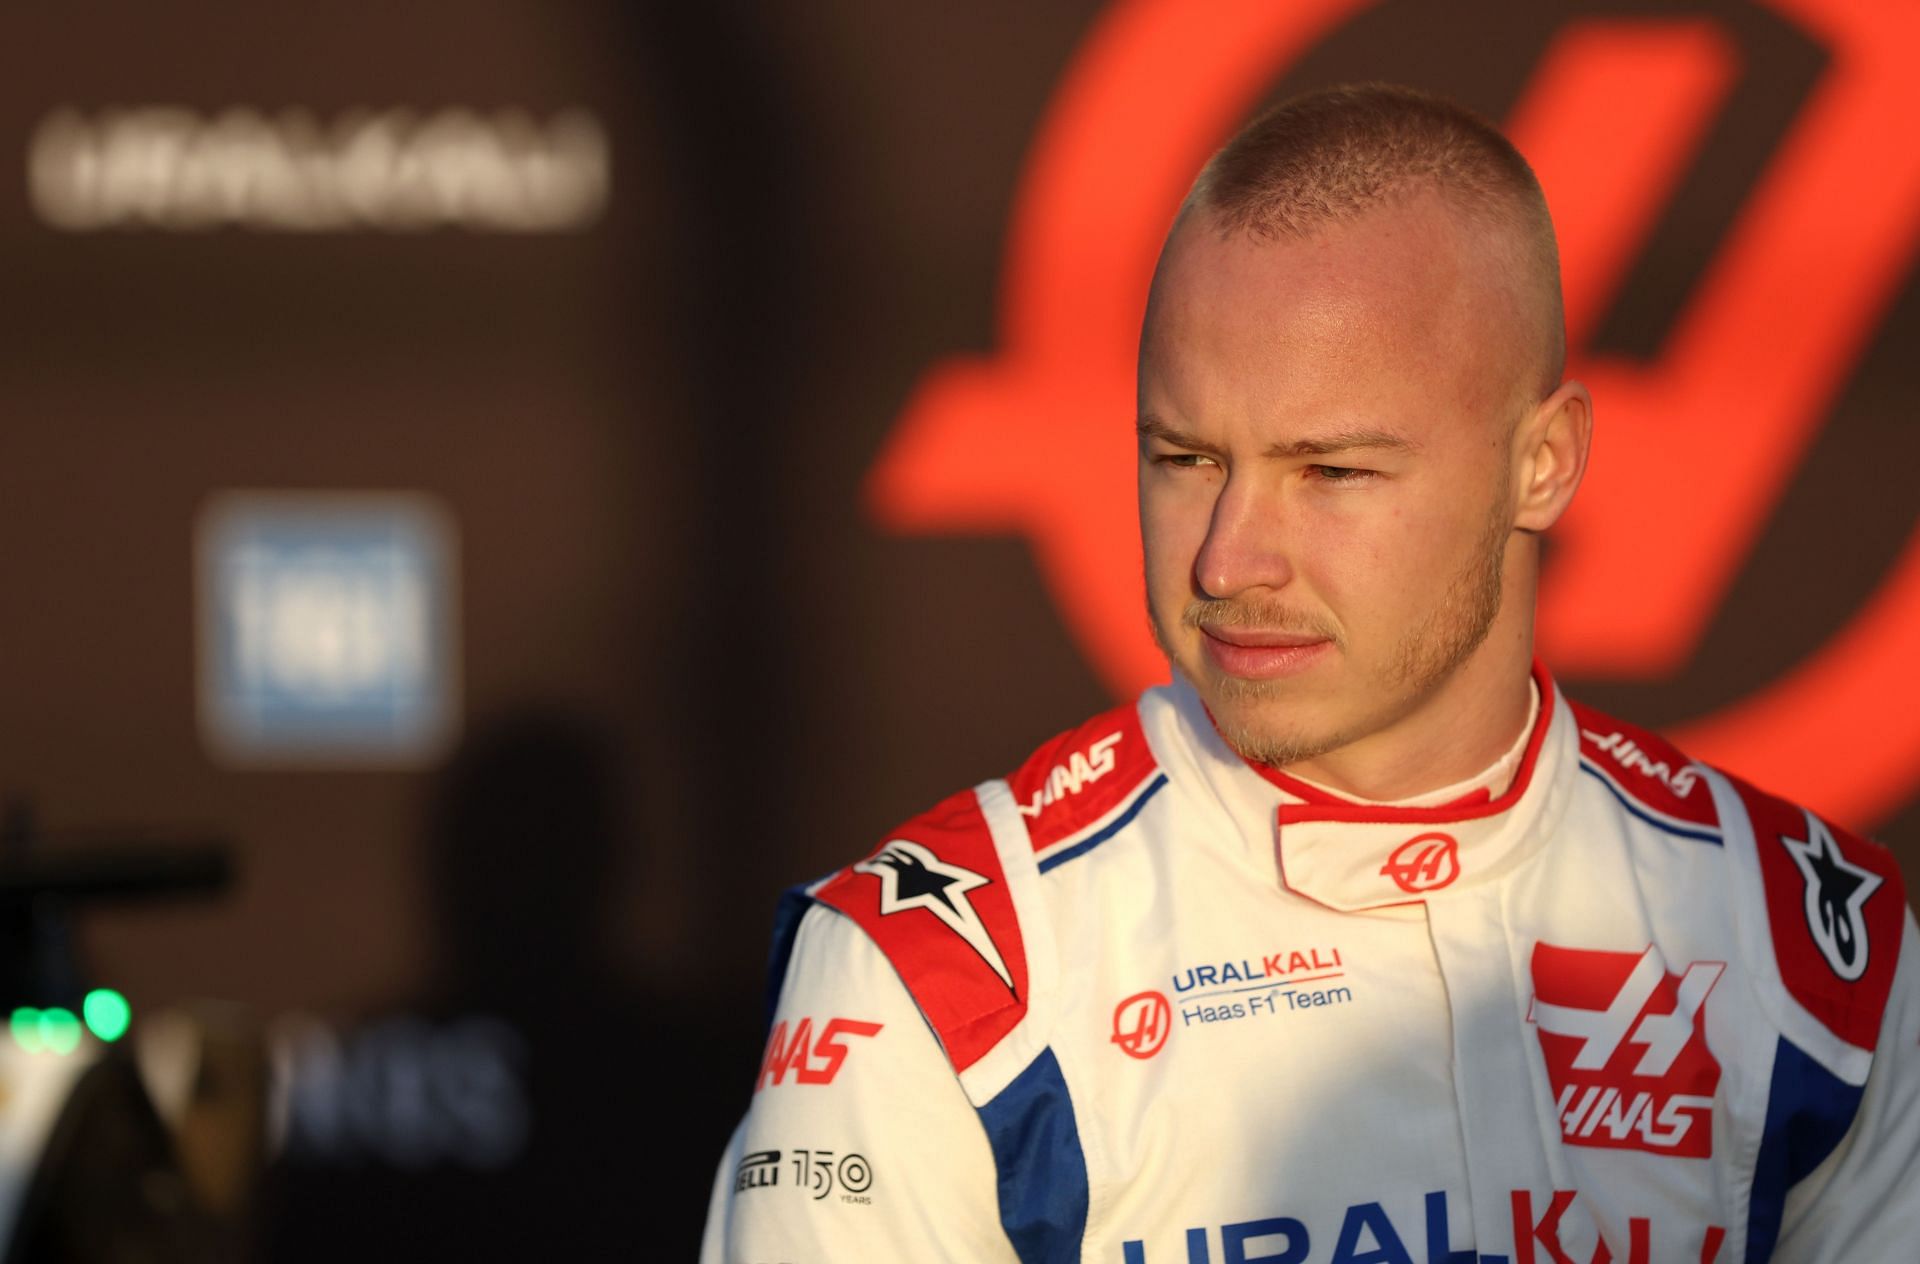 Nikita Mazepin had an unceremonious exit from F1